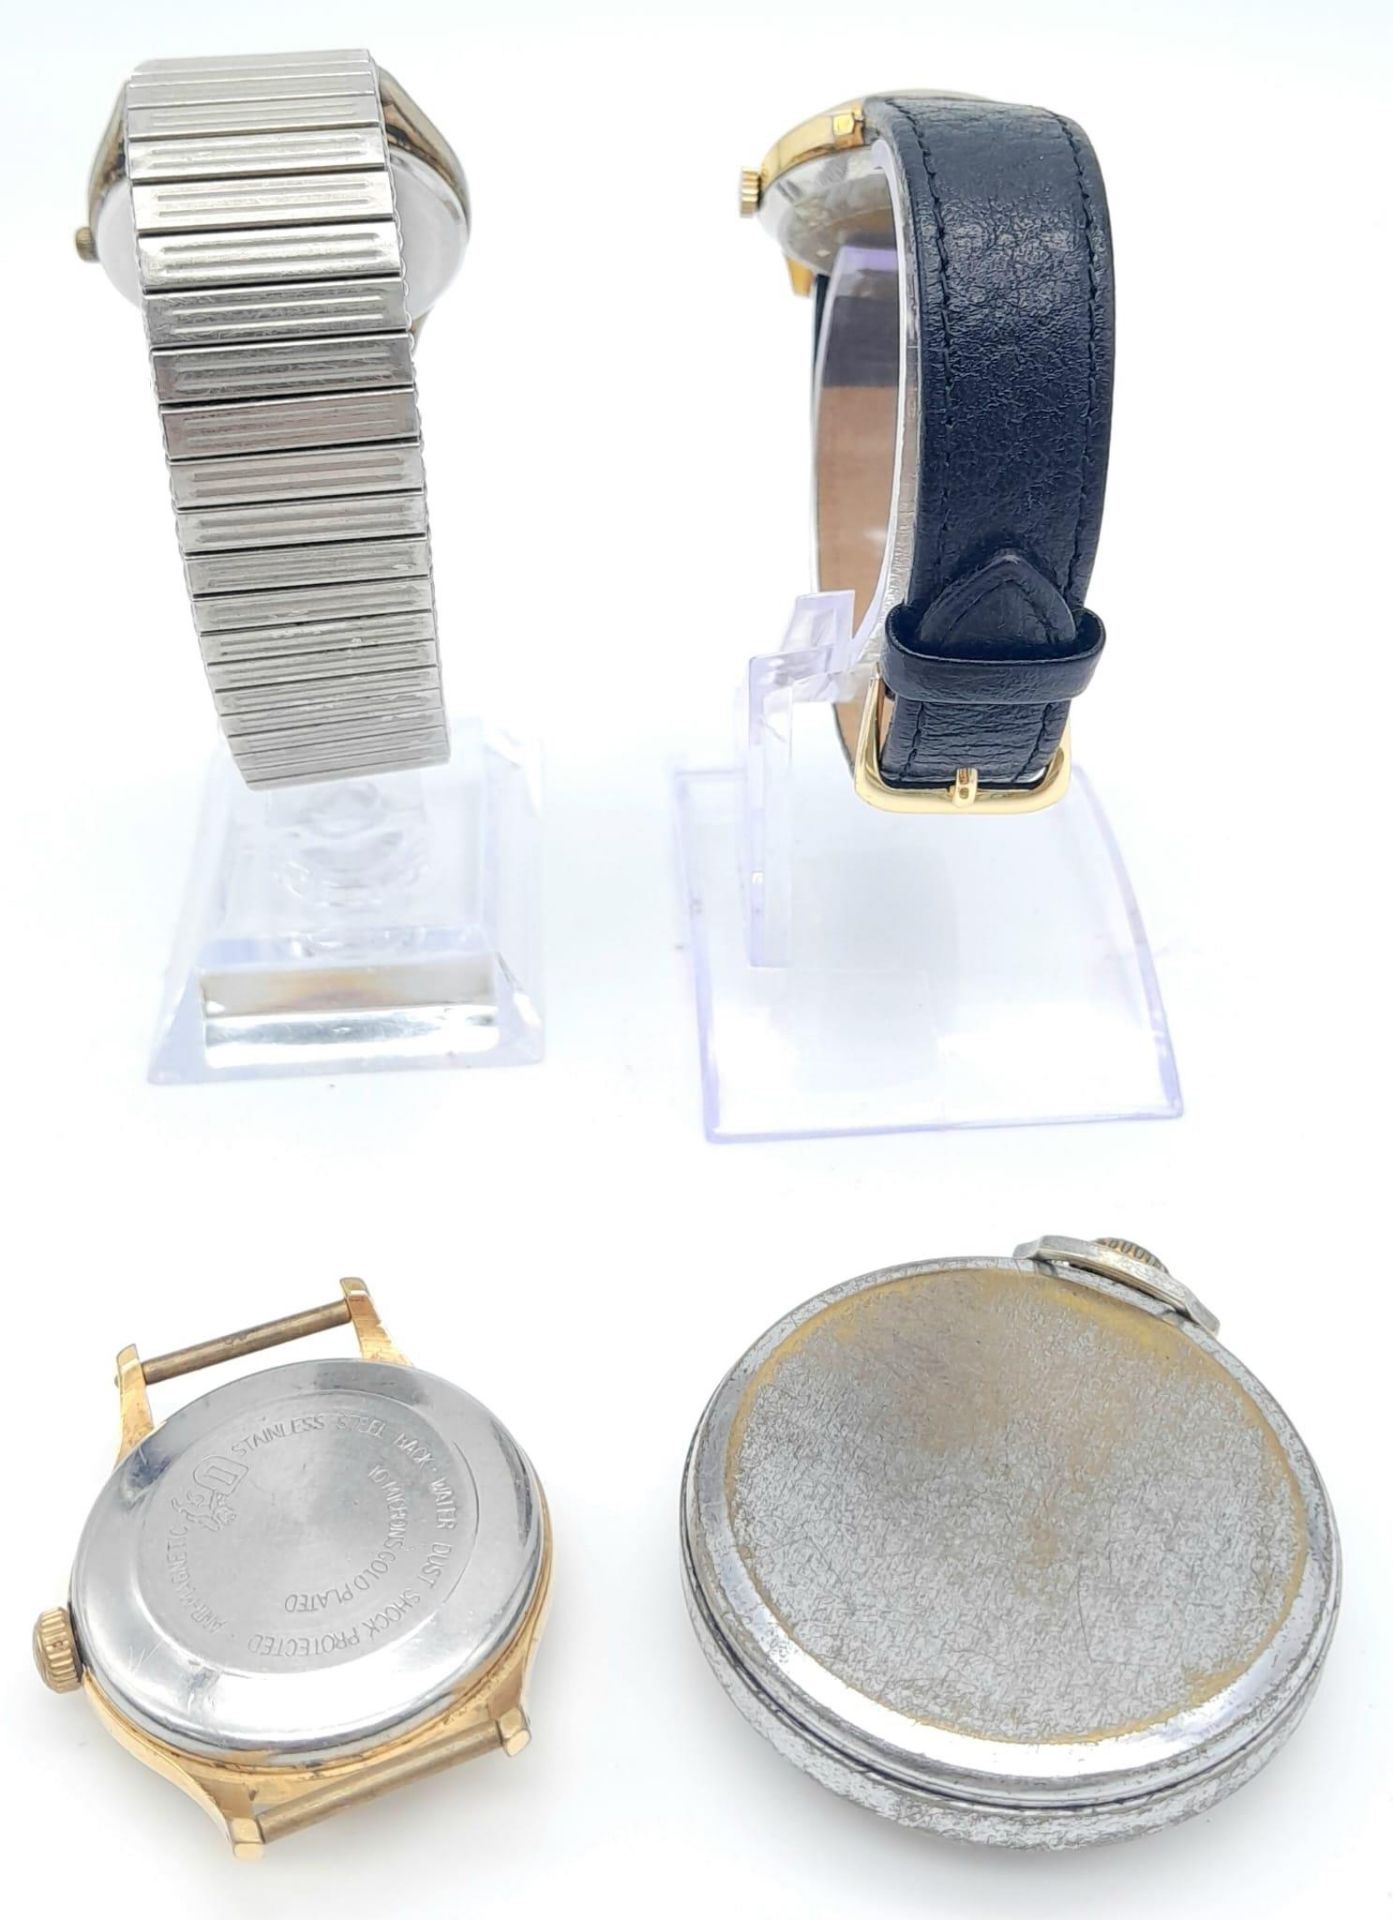 An Eclectic Mix of Four Vintage Ingersoll Time Pieces - As found - Image 2 of 5